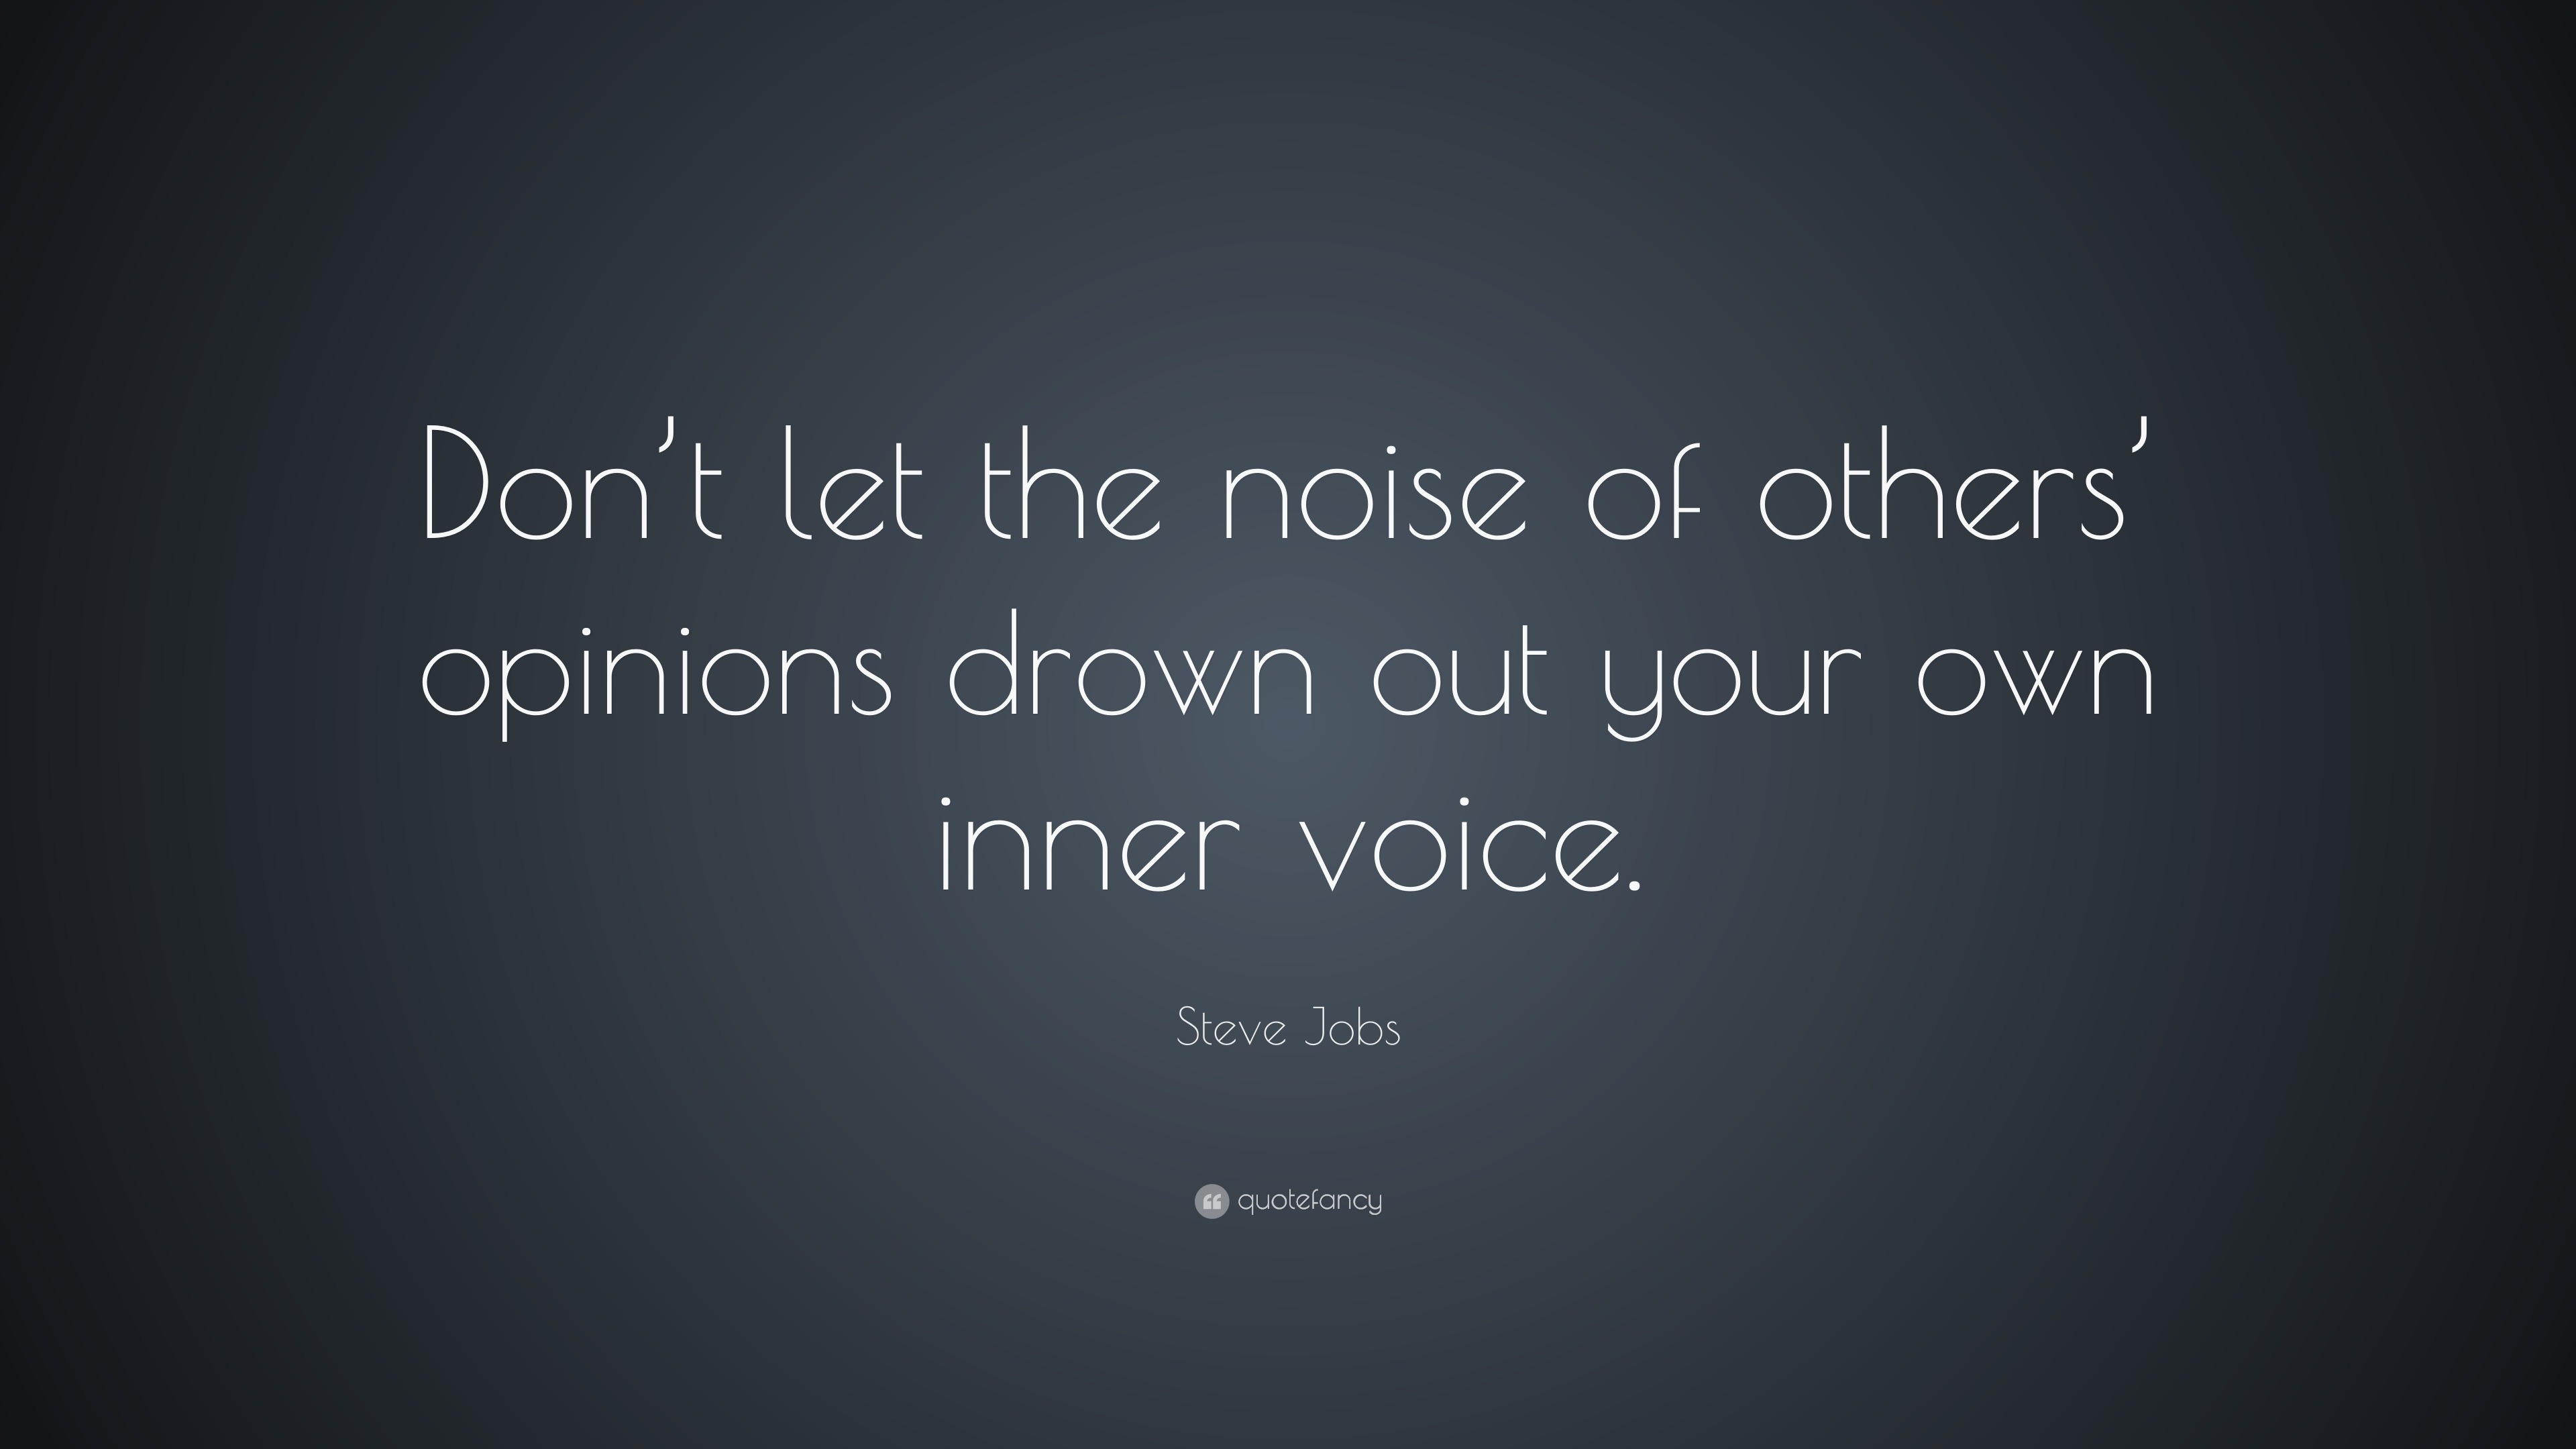 Steve Jobs Quote: “Don’t let the noise of others’ opinions drown out